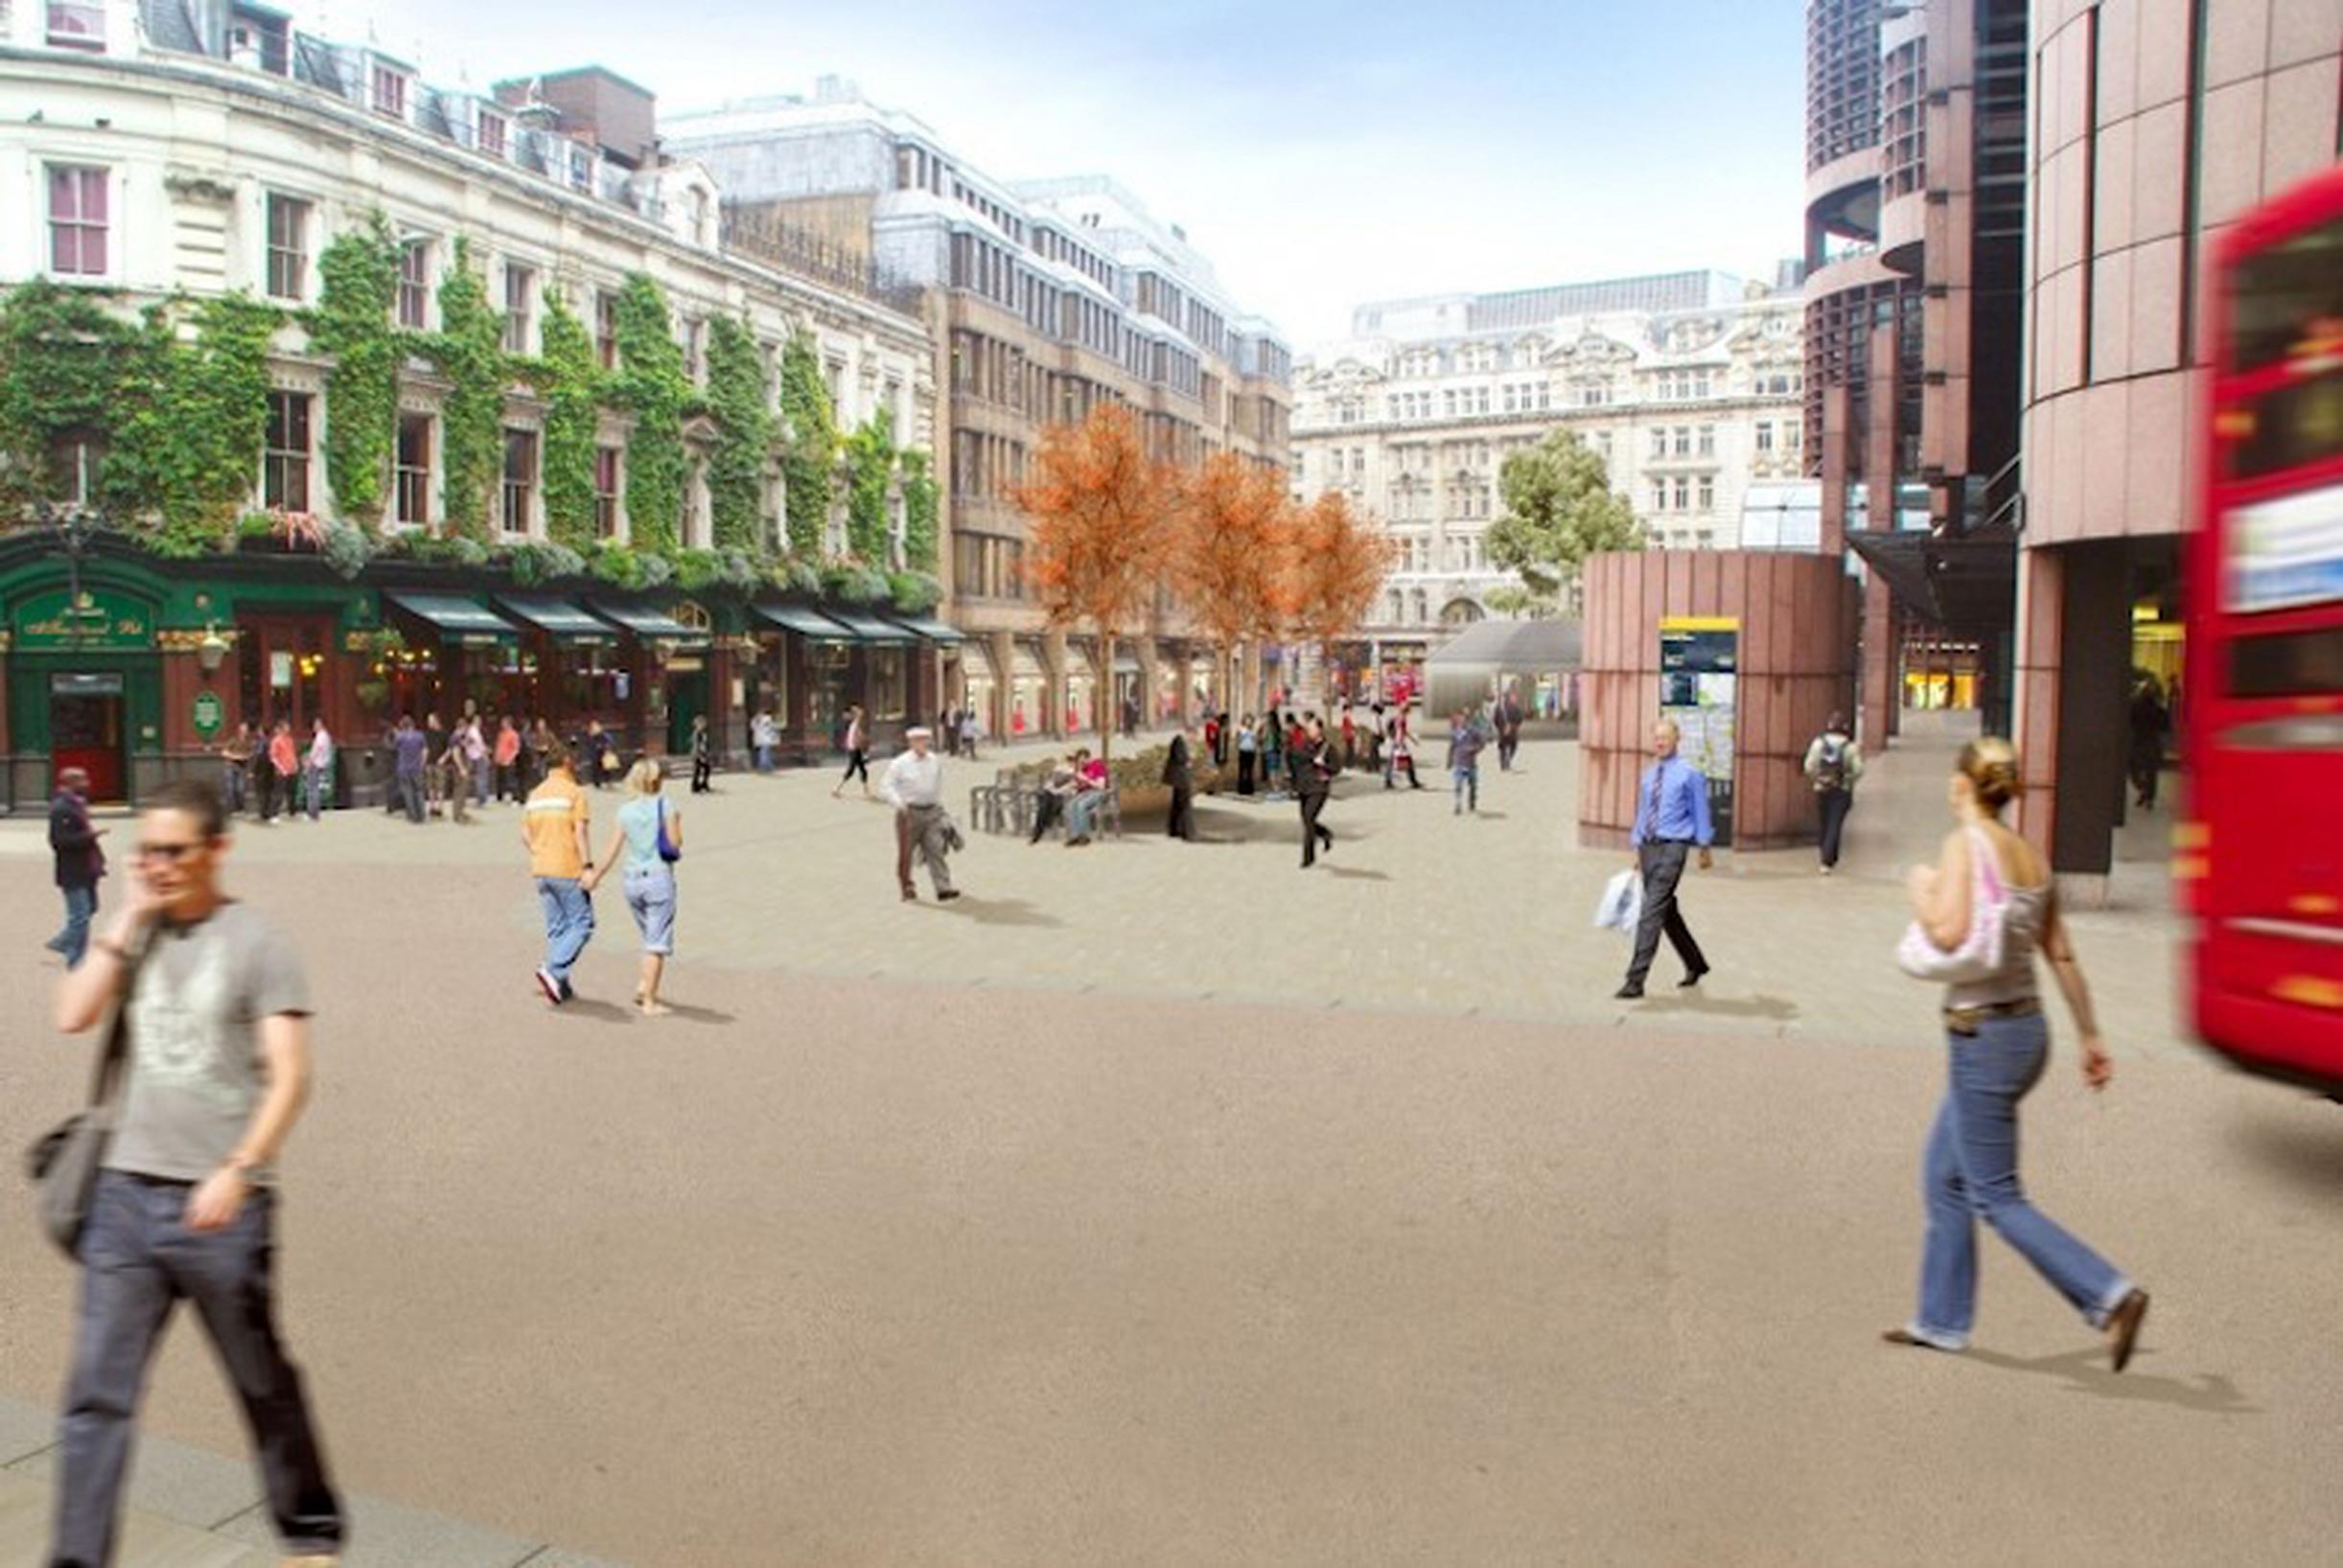 Back in 2012, the TfL board approved £30 million contribution to Crossrail’s public realm scheme to support continued regeneration at locations along the route, thanks in part to TfL’s innovative work on the value of the public realm and active modes. Transport for London is now to borrow £350m from the Department for Transport, as delays to the £15bn Crossrail project leave it facing a serious funding shortfall, but hopefully public realm quality will not be compromised